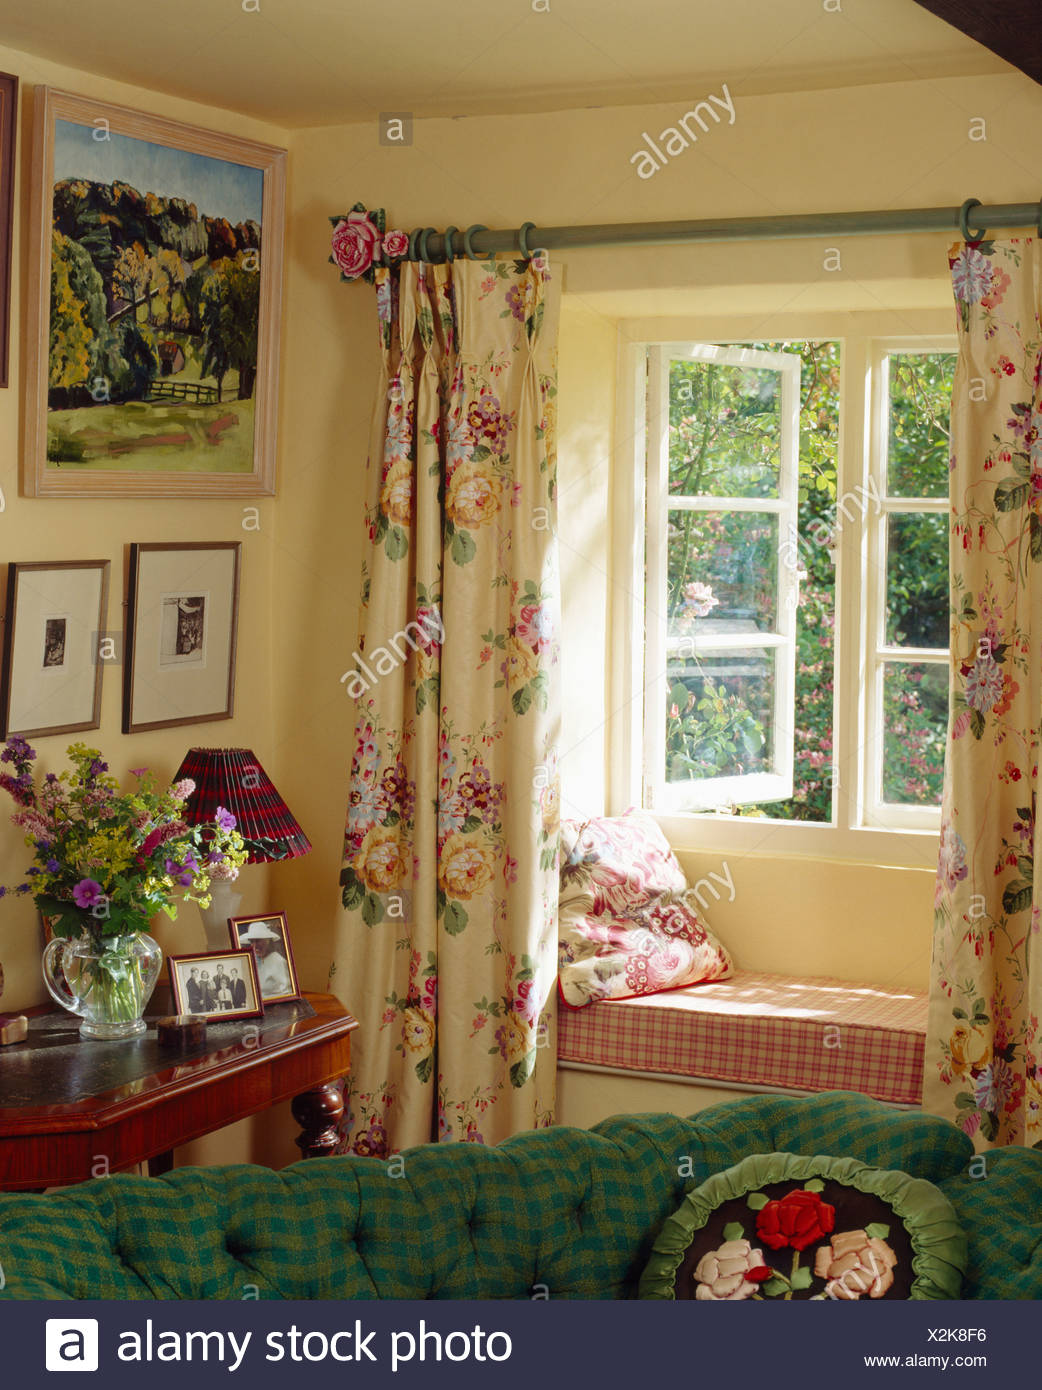 Cottage Living Room With Floral Curtains On Window With Checked Cushion On Window Seat Stock Photo Alamy